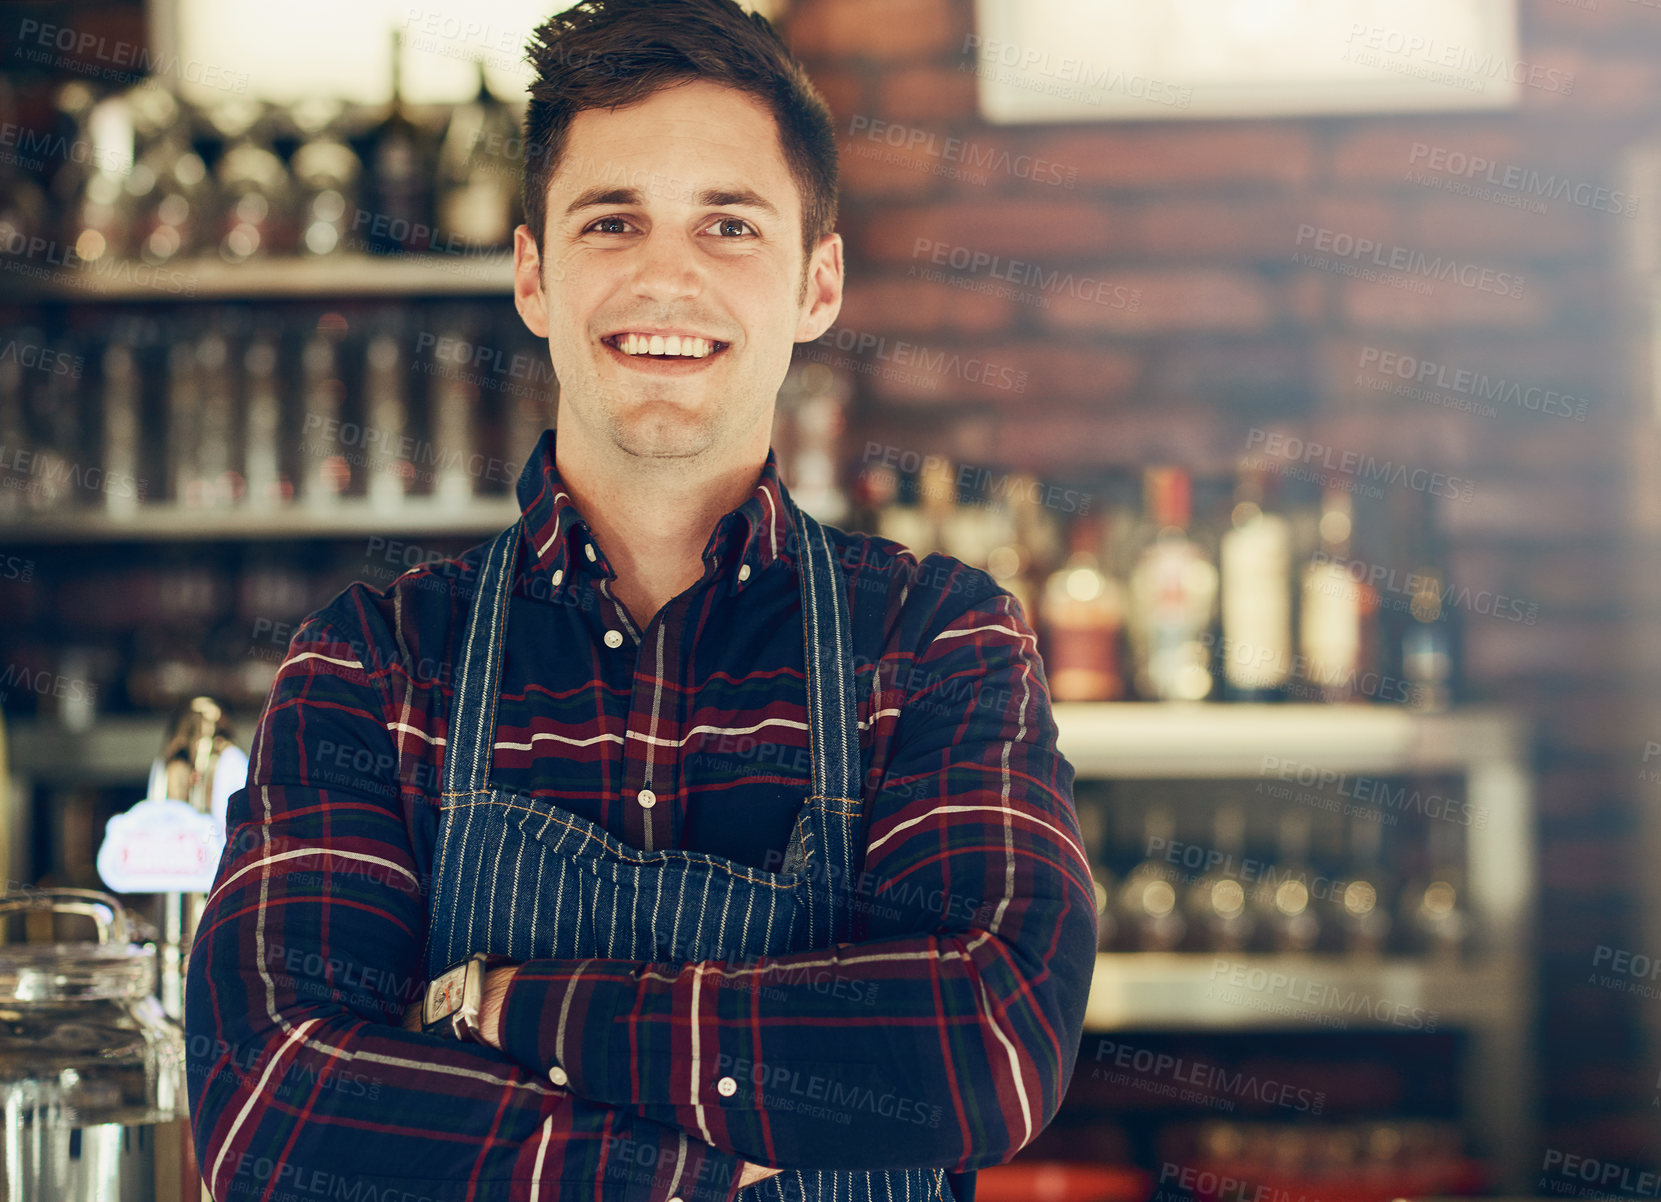 Buy stock photo Portrait of a smiling young entrepreneur standing in a small restaurant